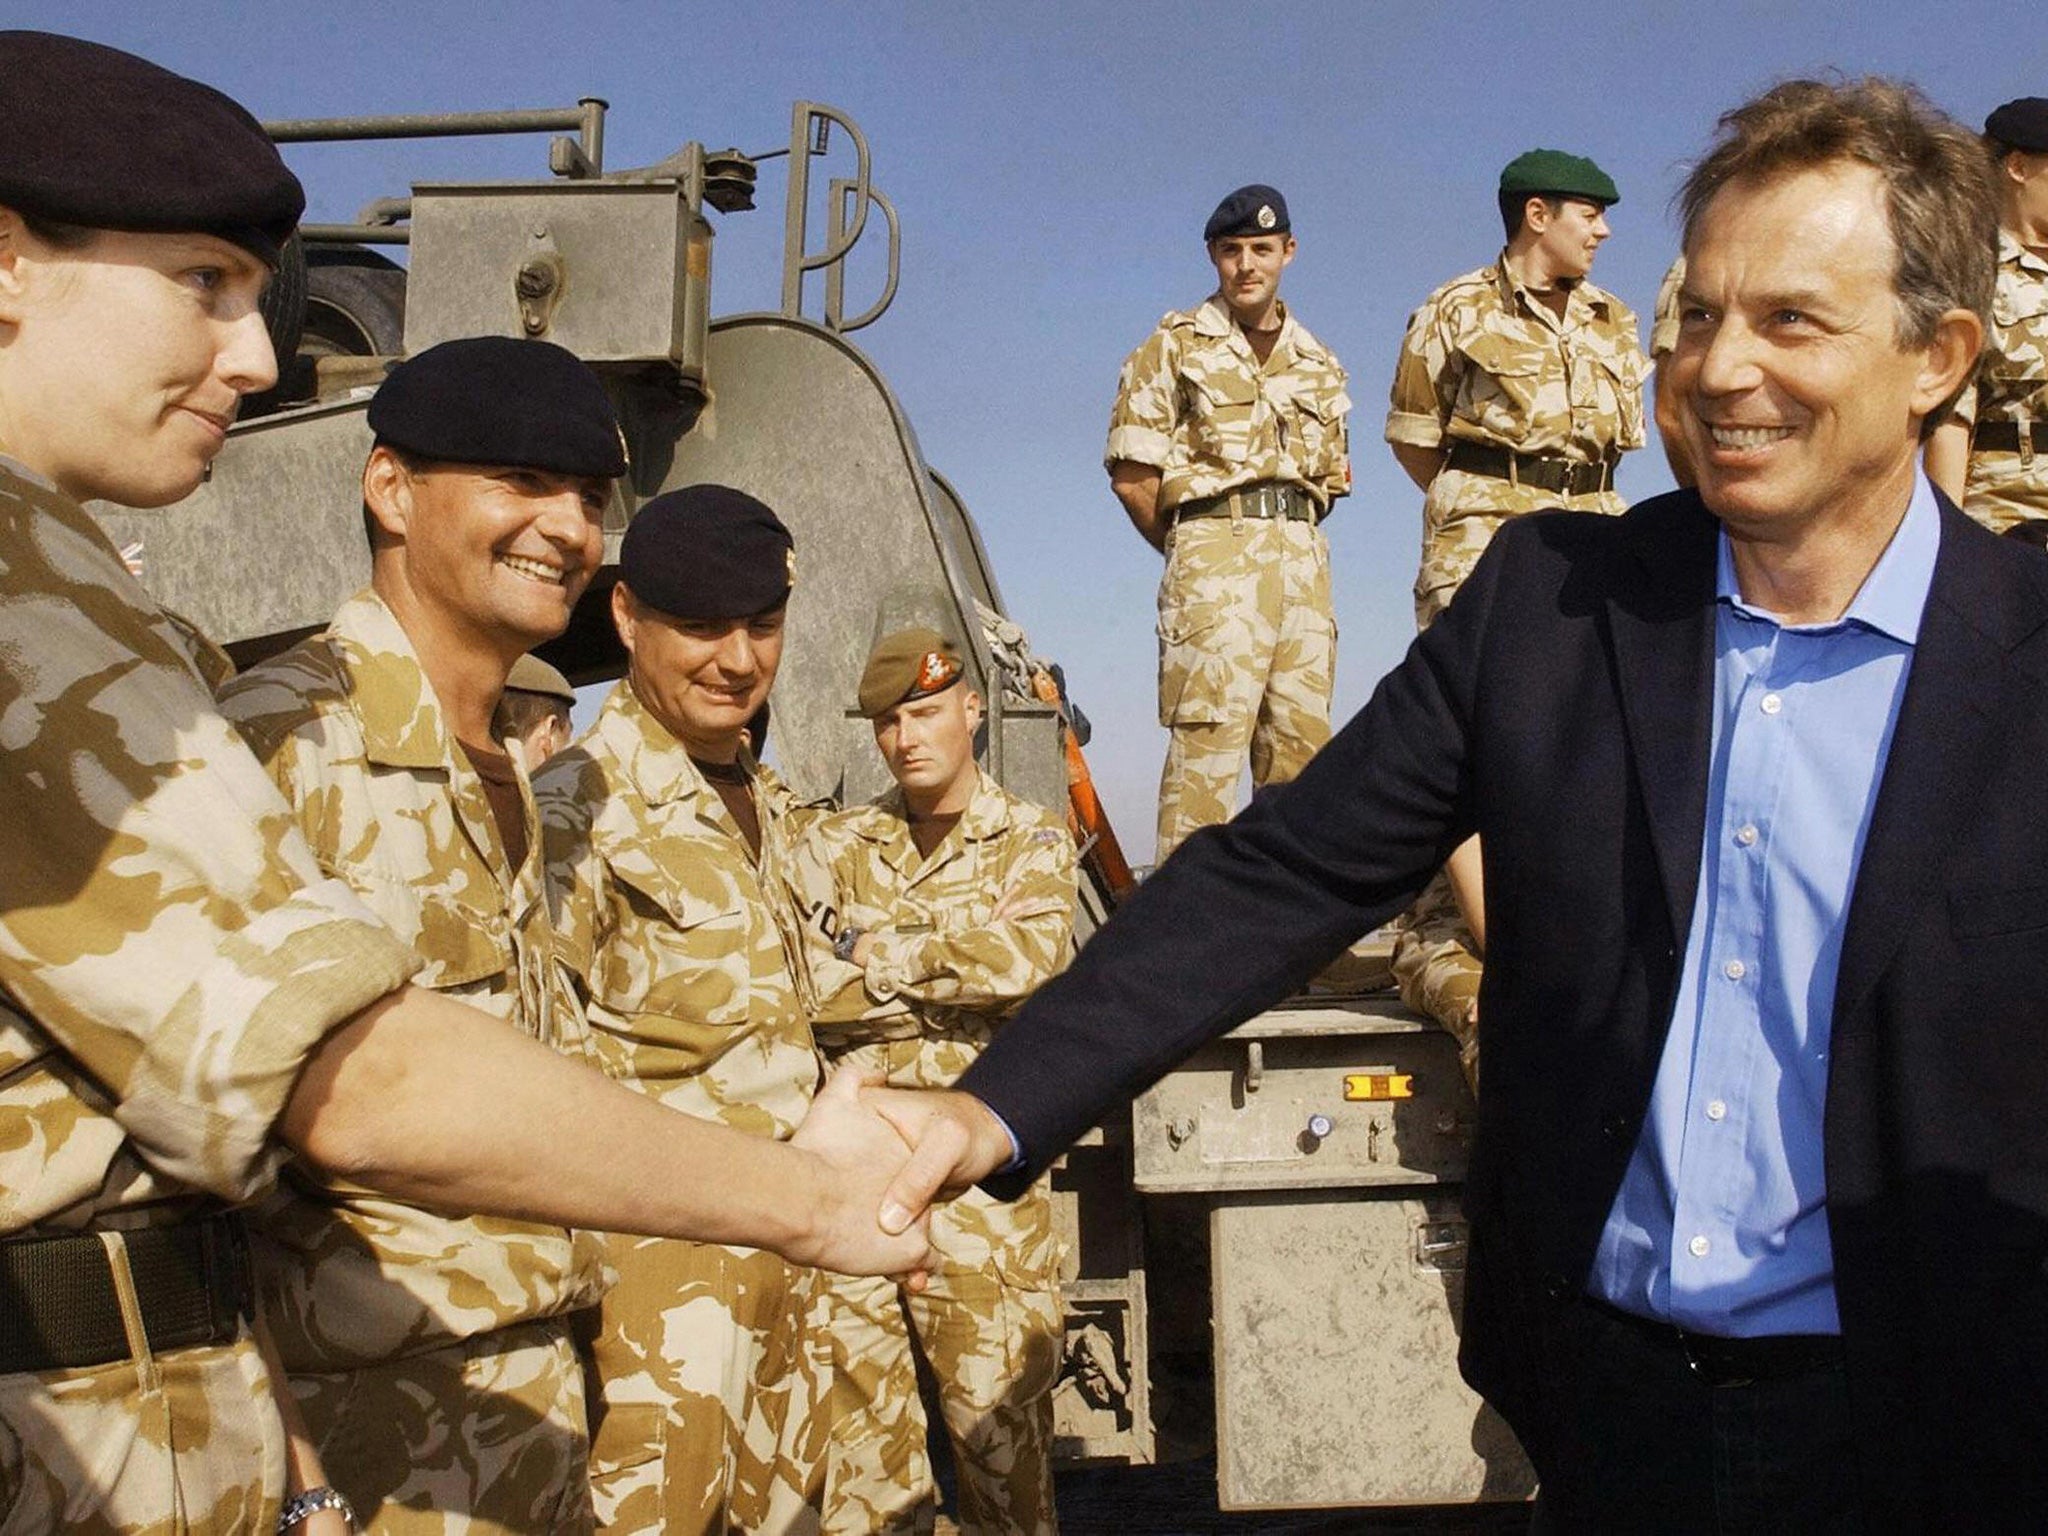 Tony Blair said the intelligence he received and acted on was wrong